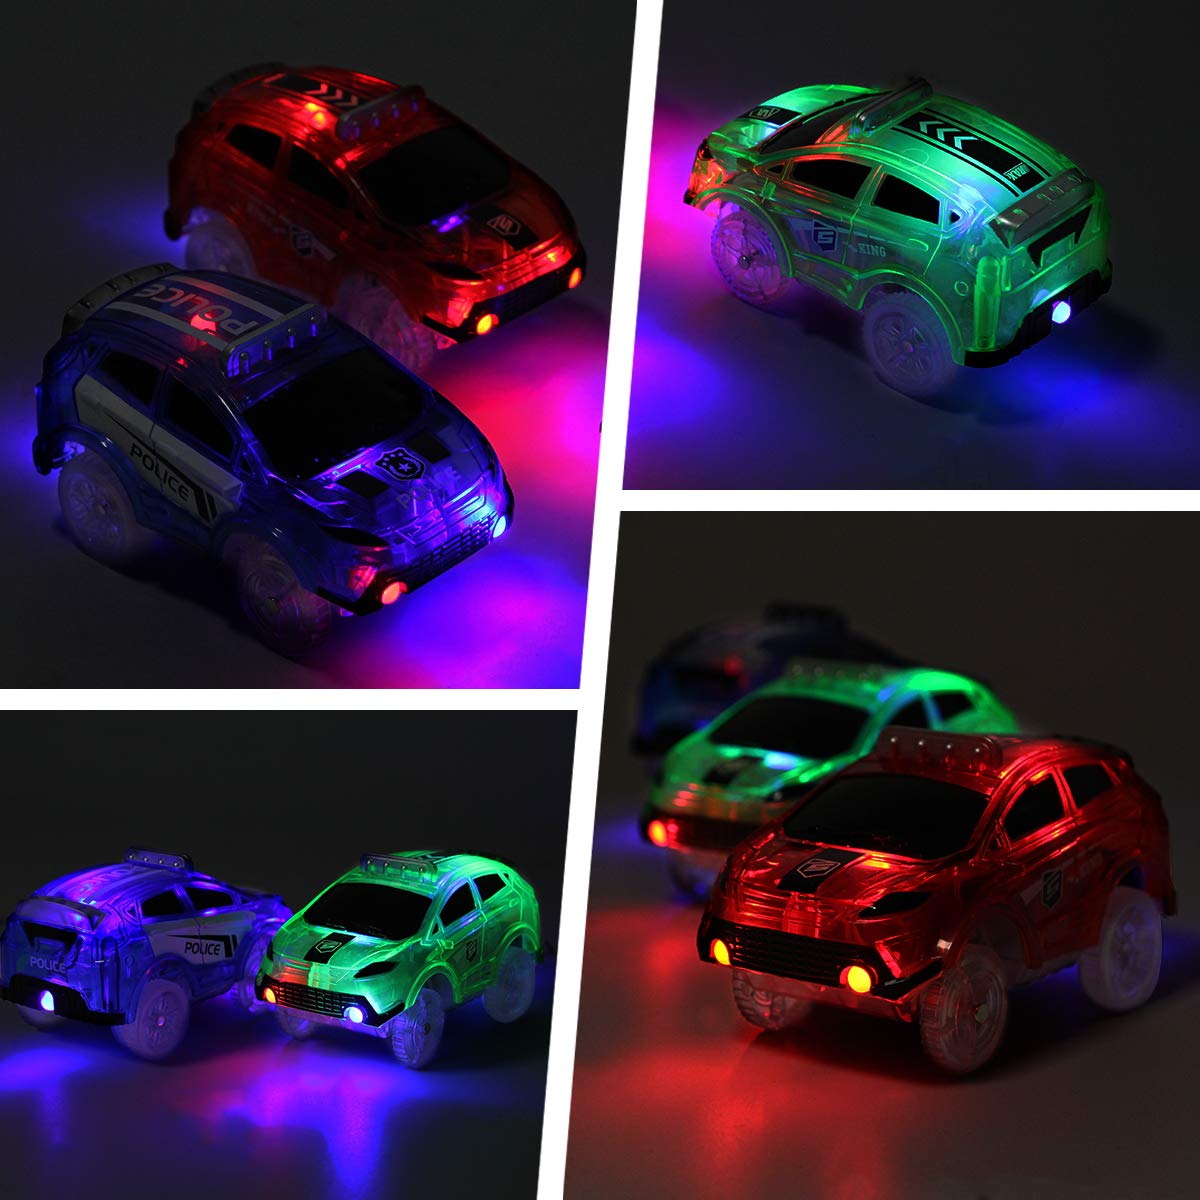 Tracks Cars Replacement only, Toy Cars for Most Tracks Glow in The Dark, Racing Car Track Accessories with 5 Flashing LED Lights, Compatible with Most Tracks for Kids Boys and Girls(3pack)